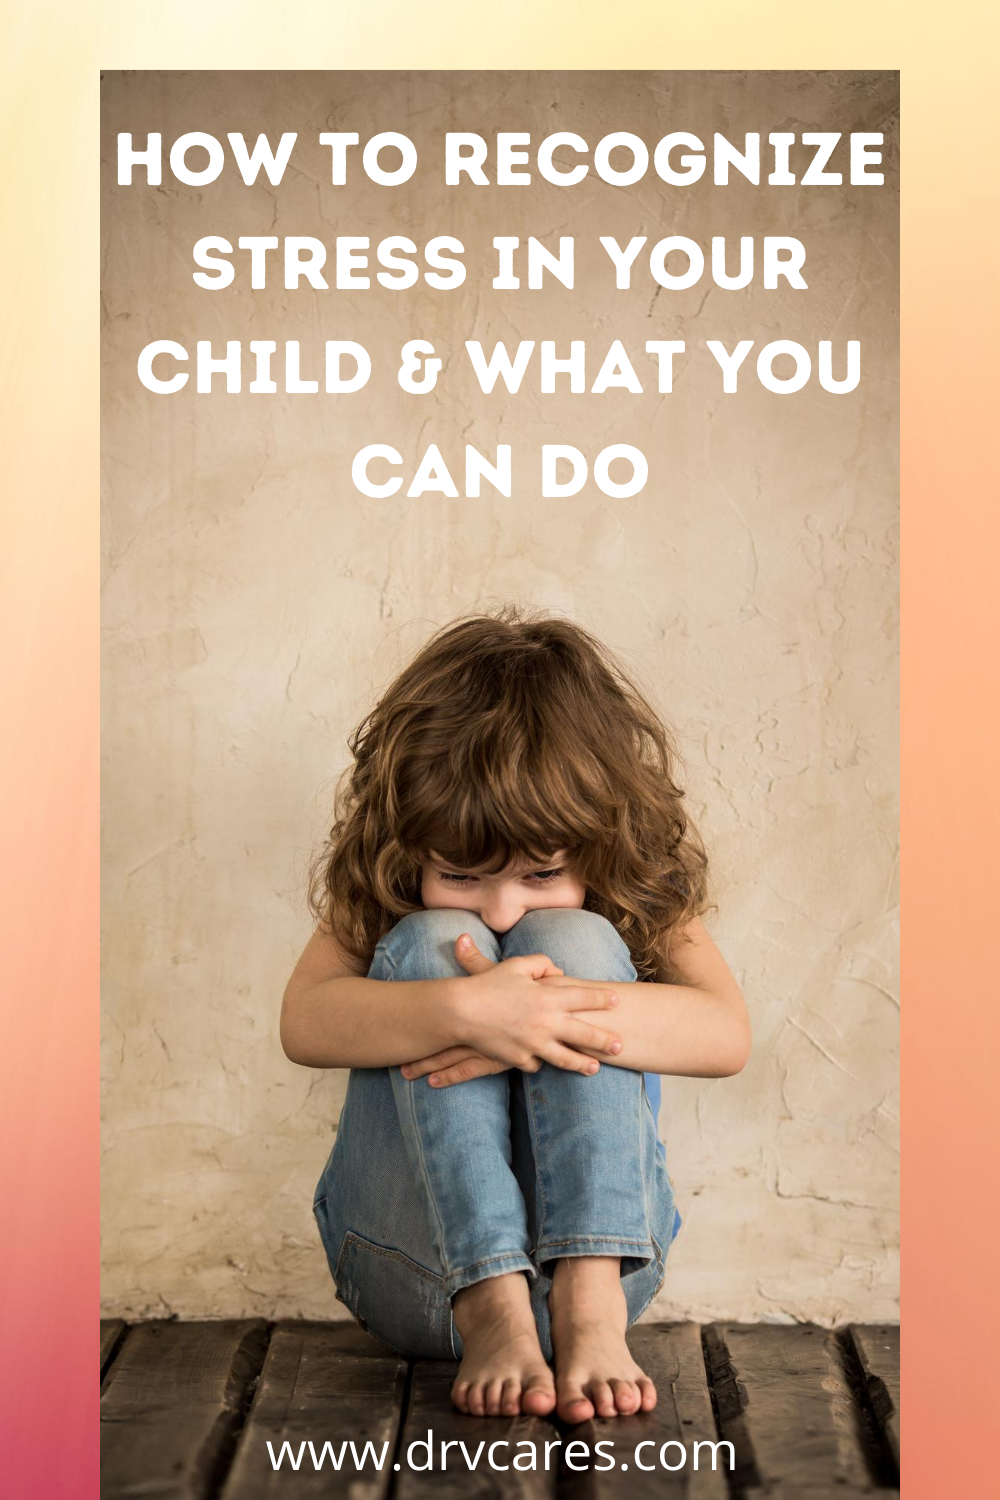 How to recognize stress in a child